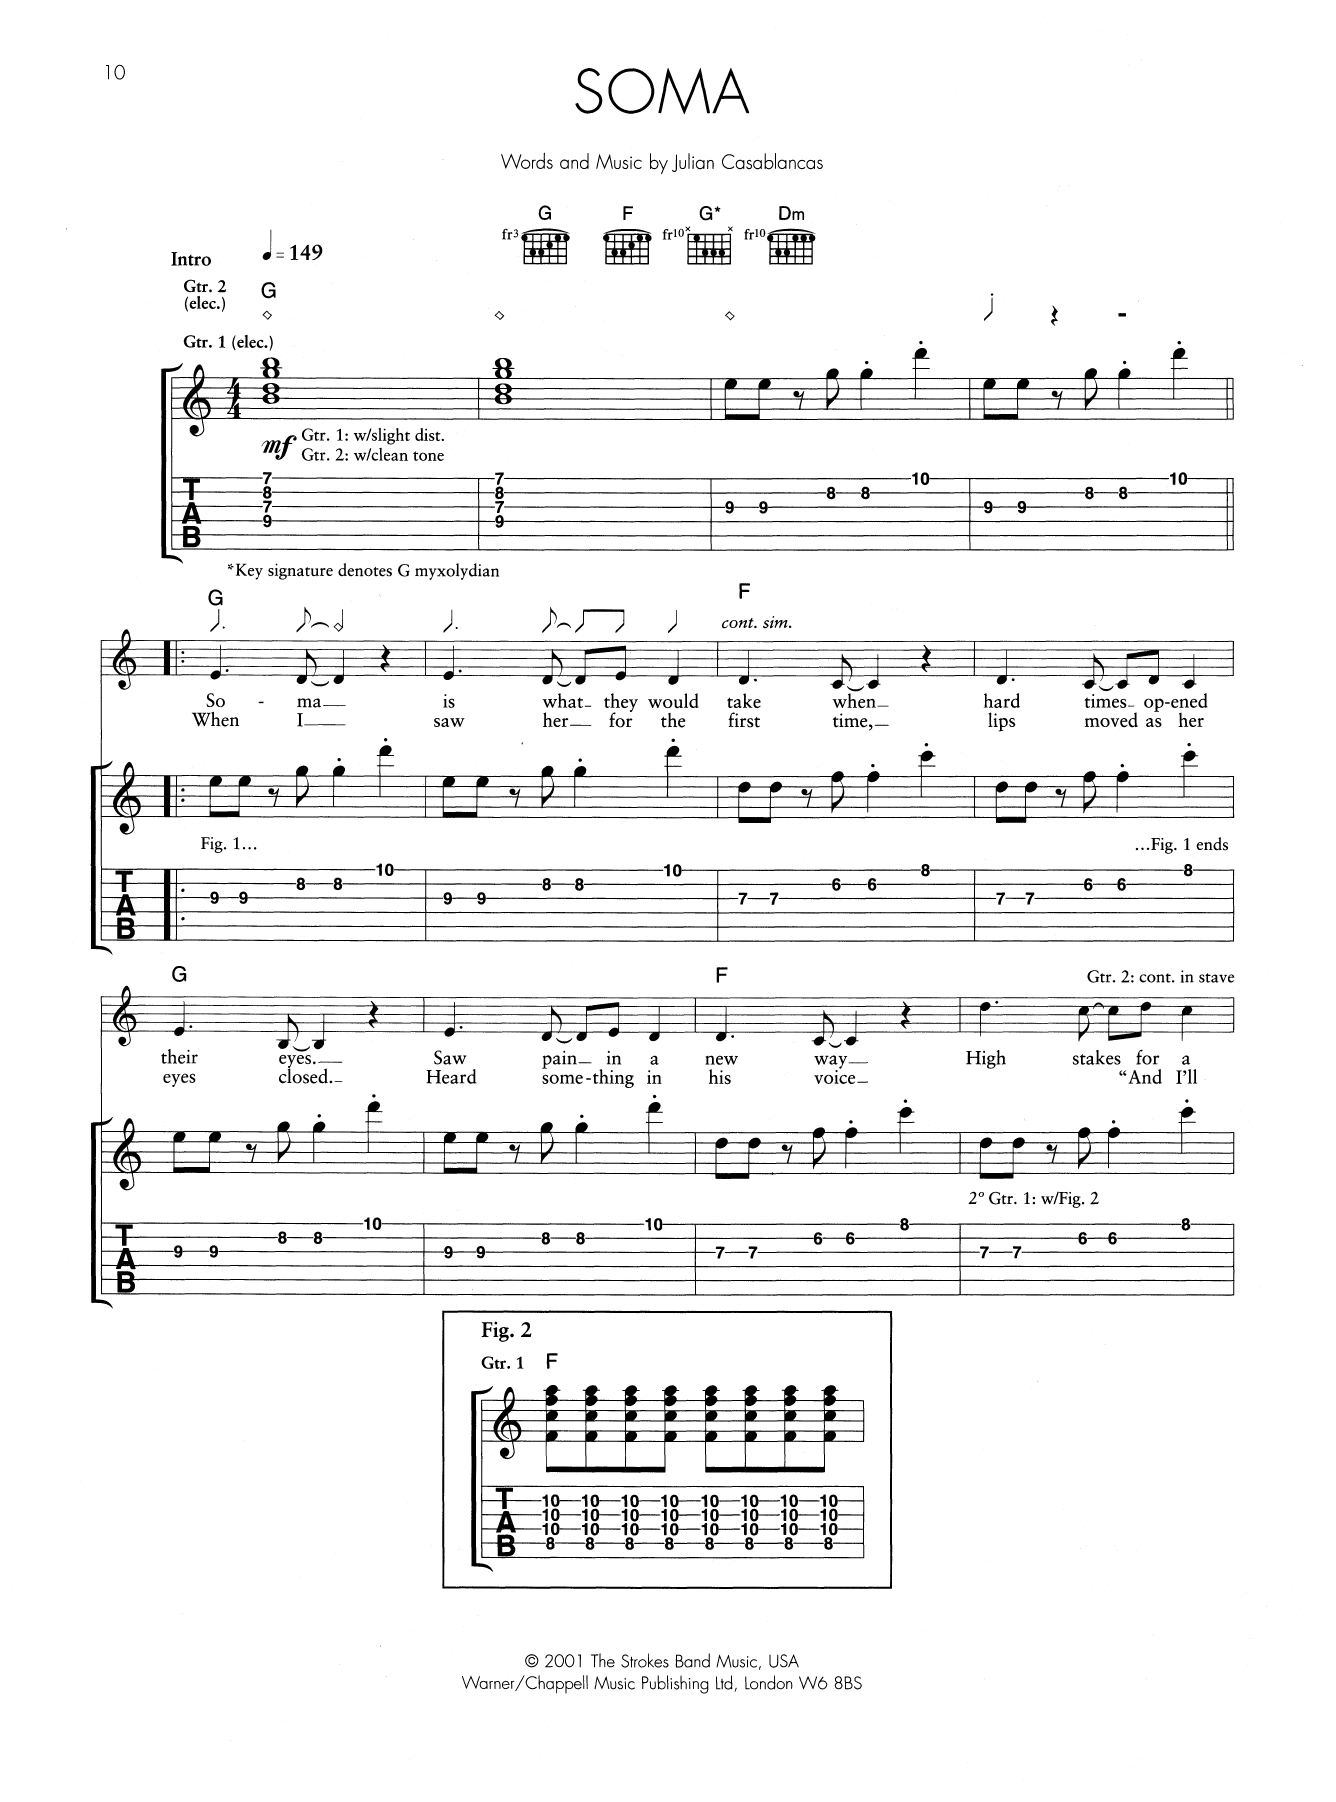 Download The Strokes Soma Sheet Music